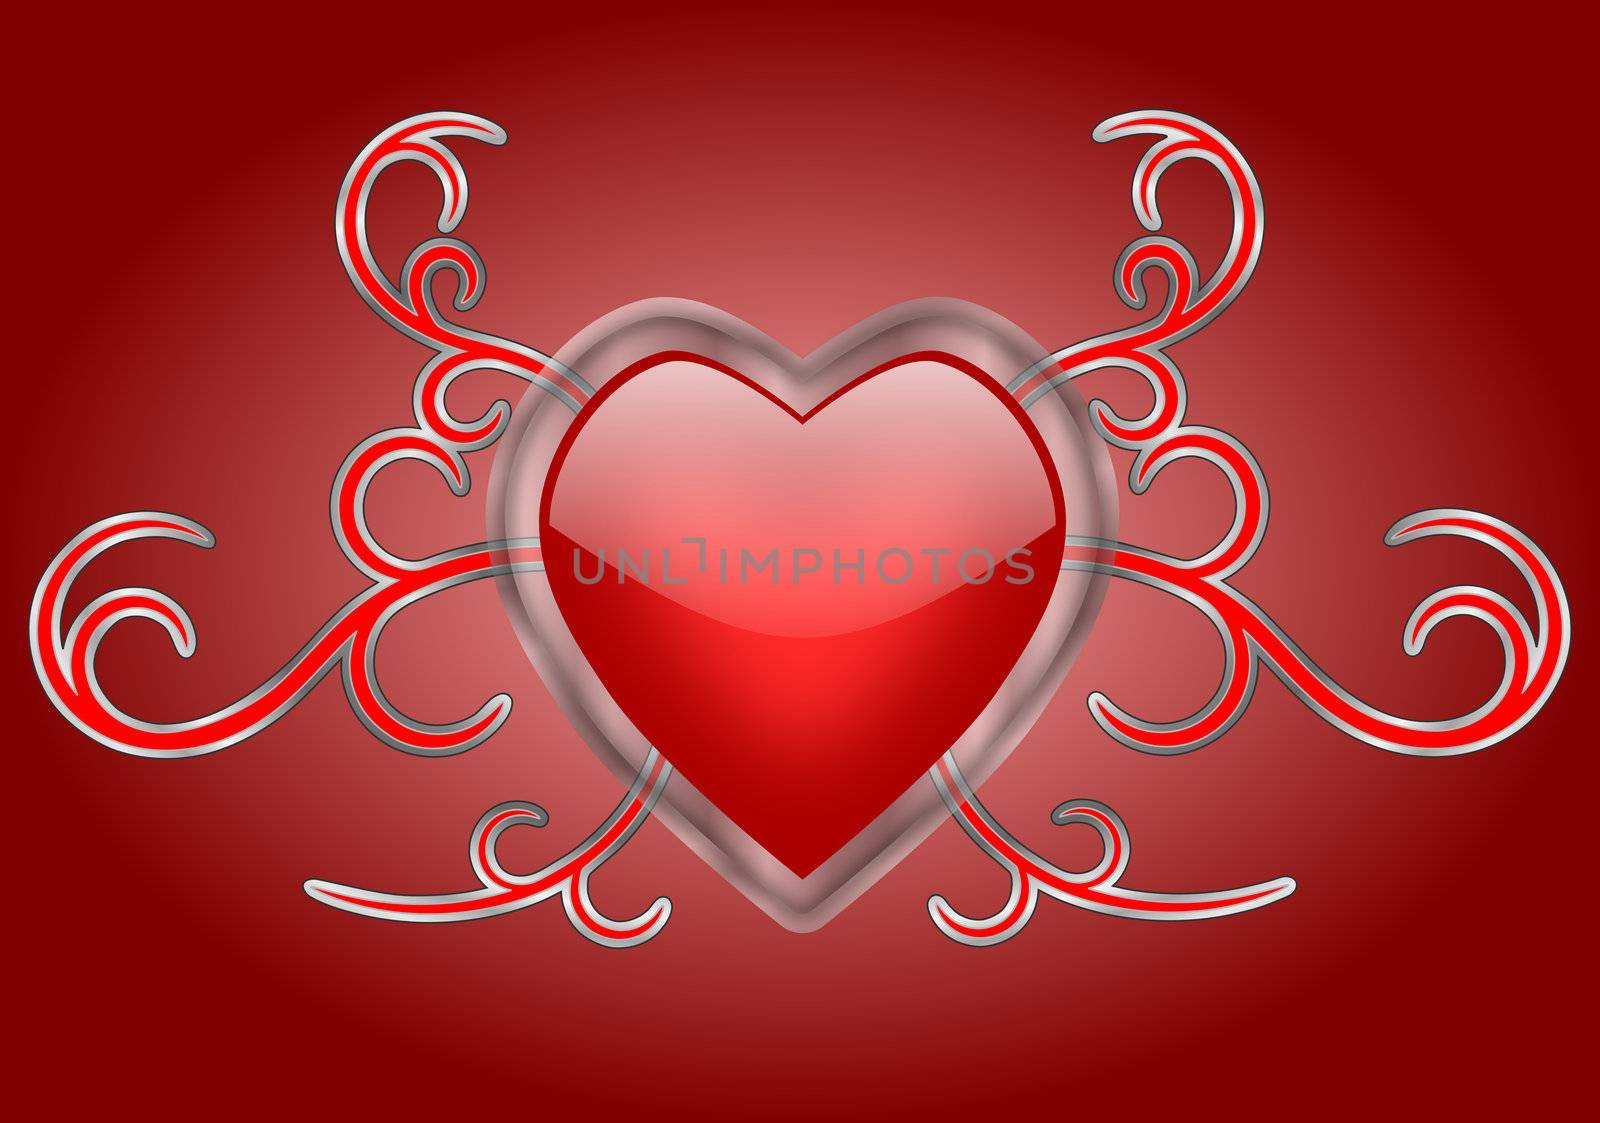 A shiny red heart with a transparent glass frame on silver and red gothic swirls background